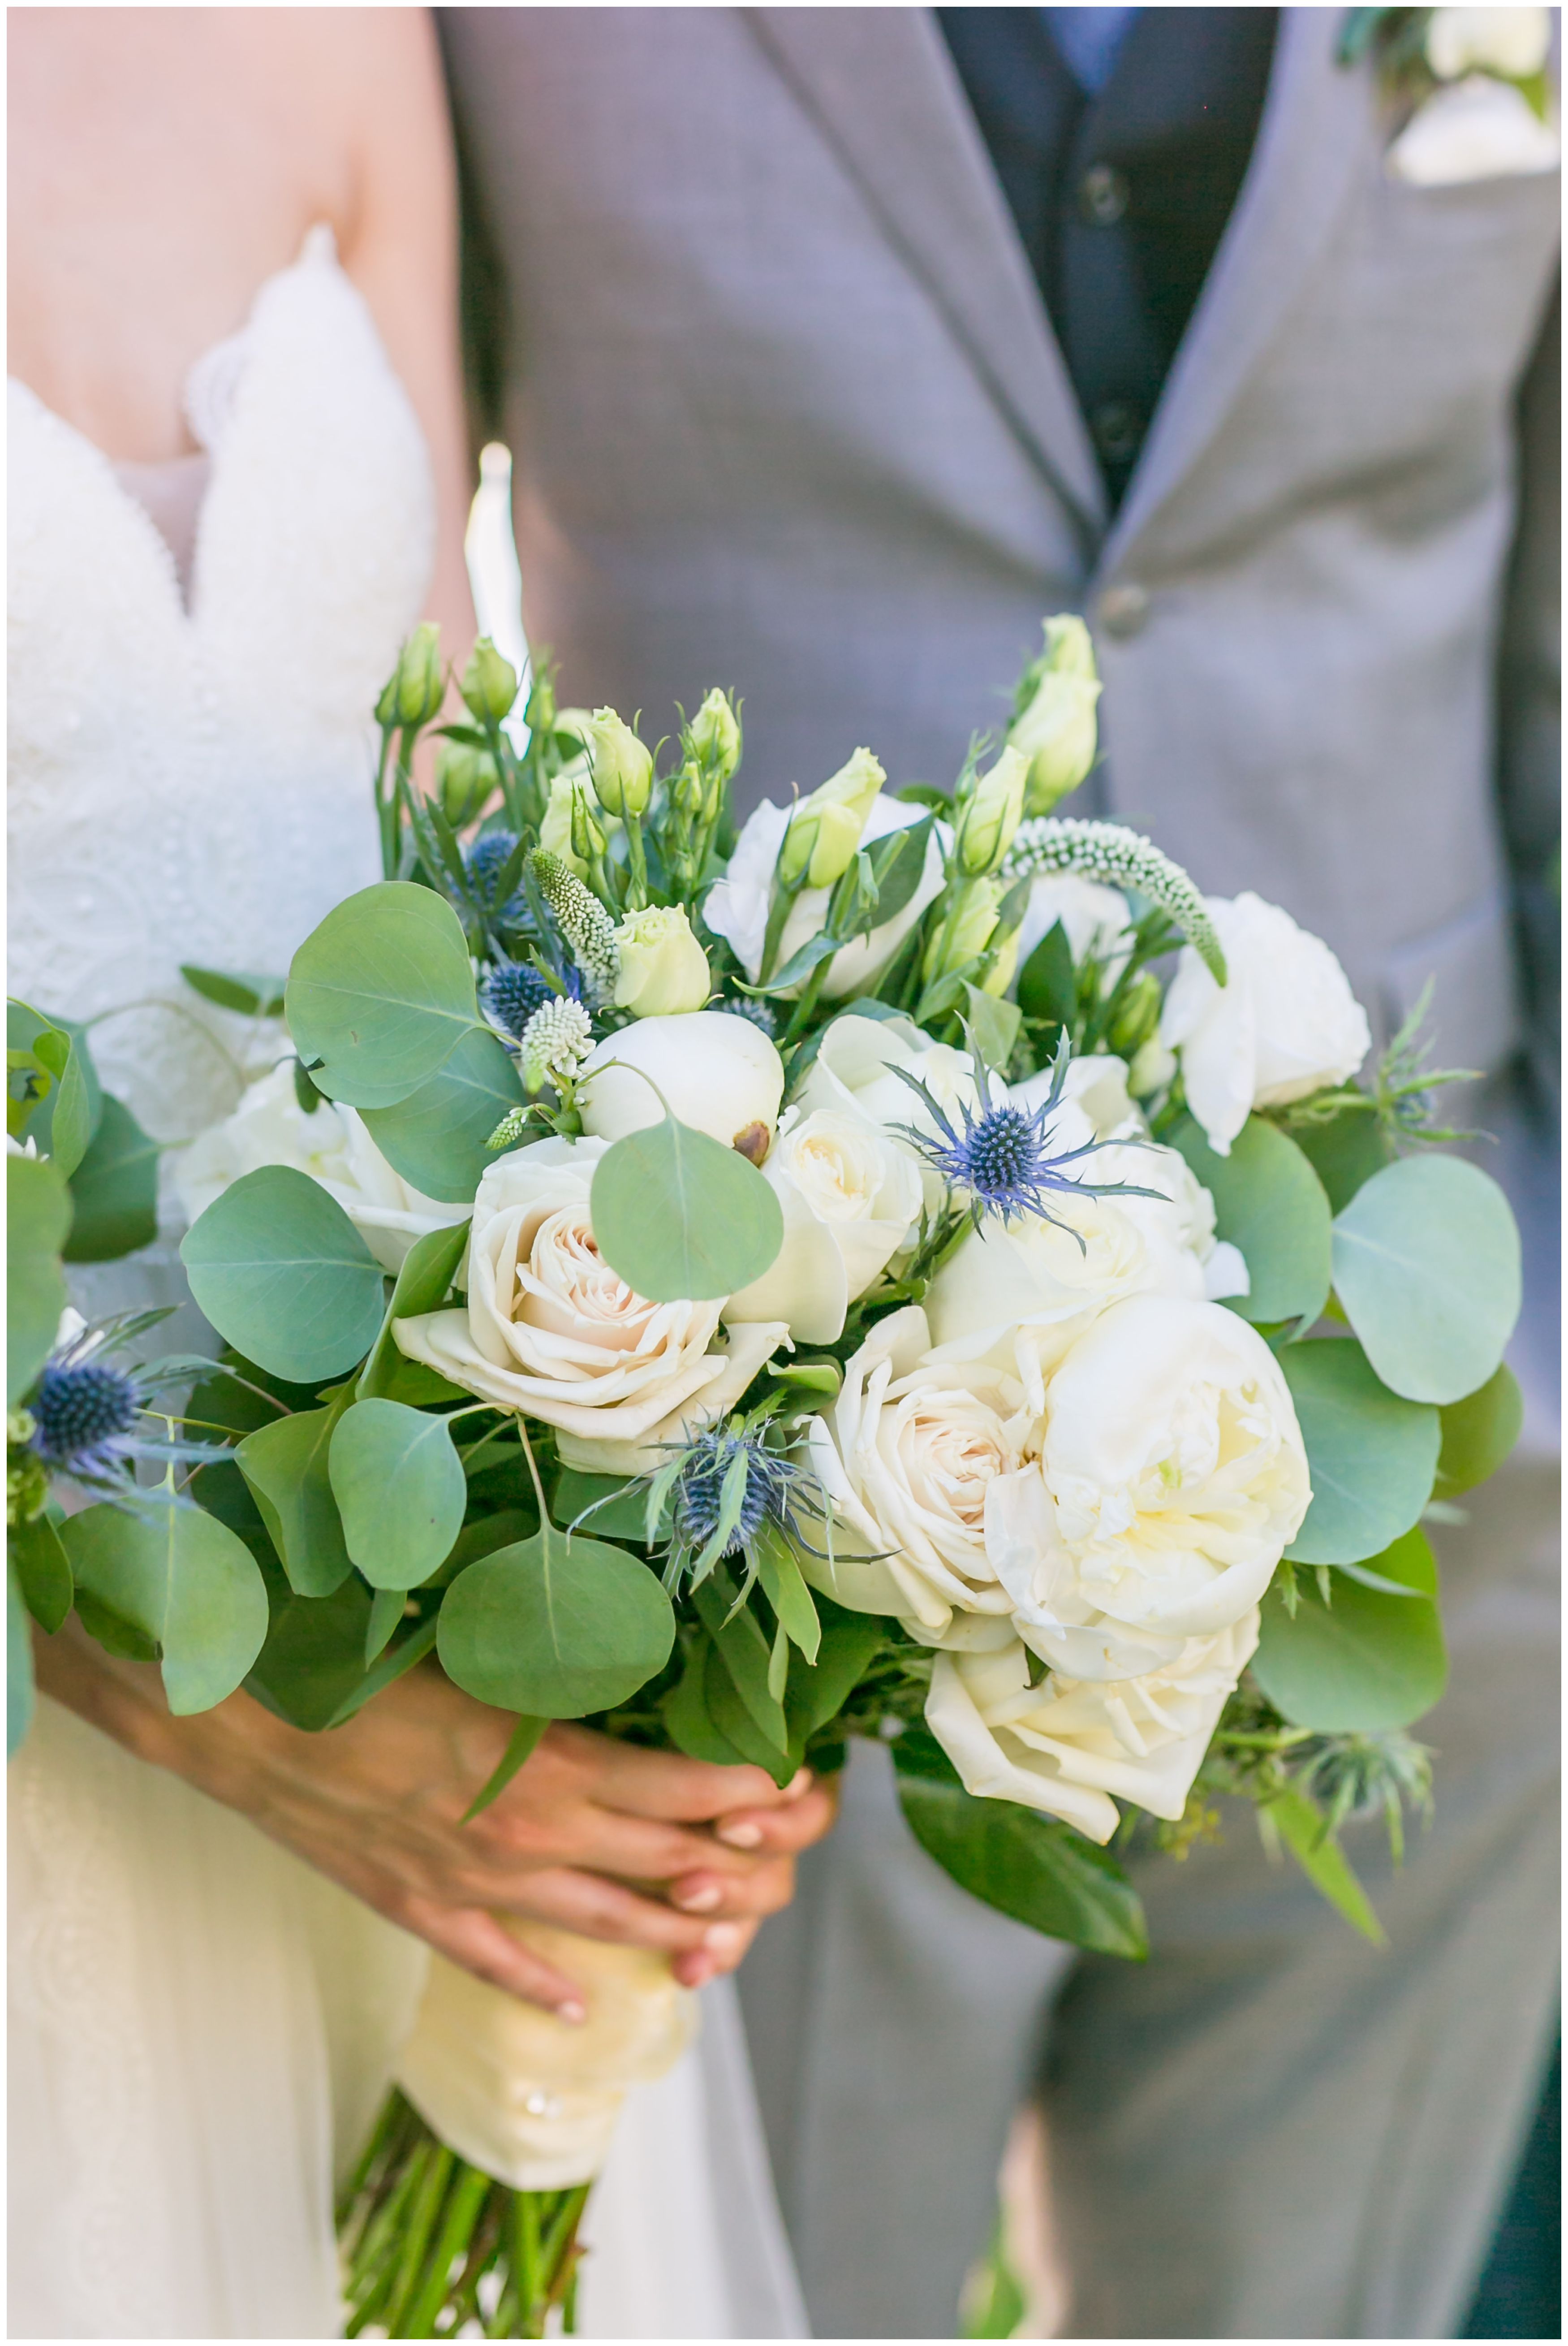 Bride and groom with white peony and rose bridal bouquet